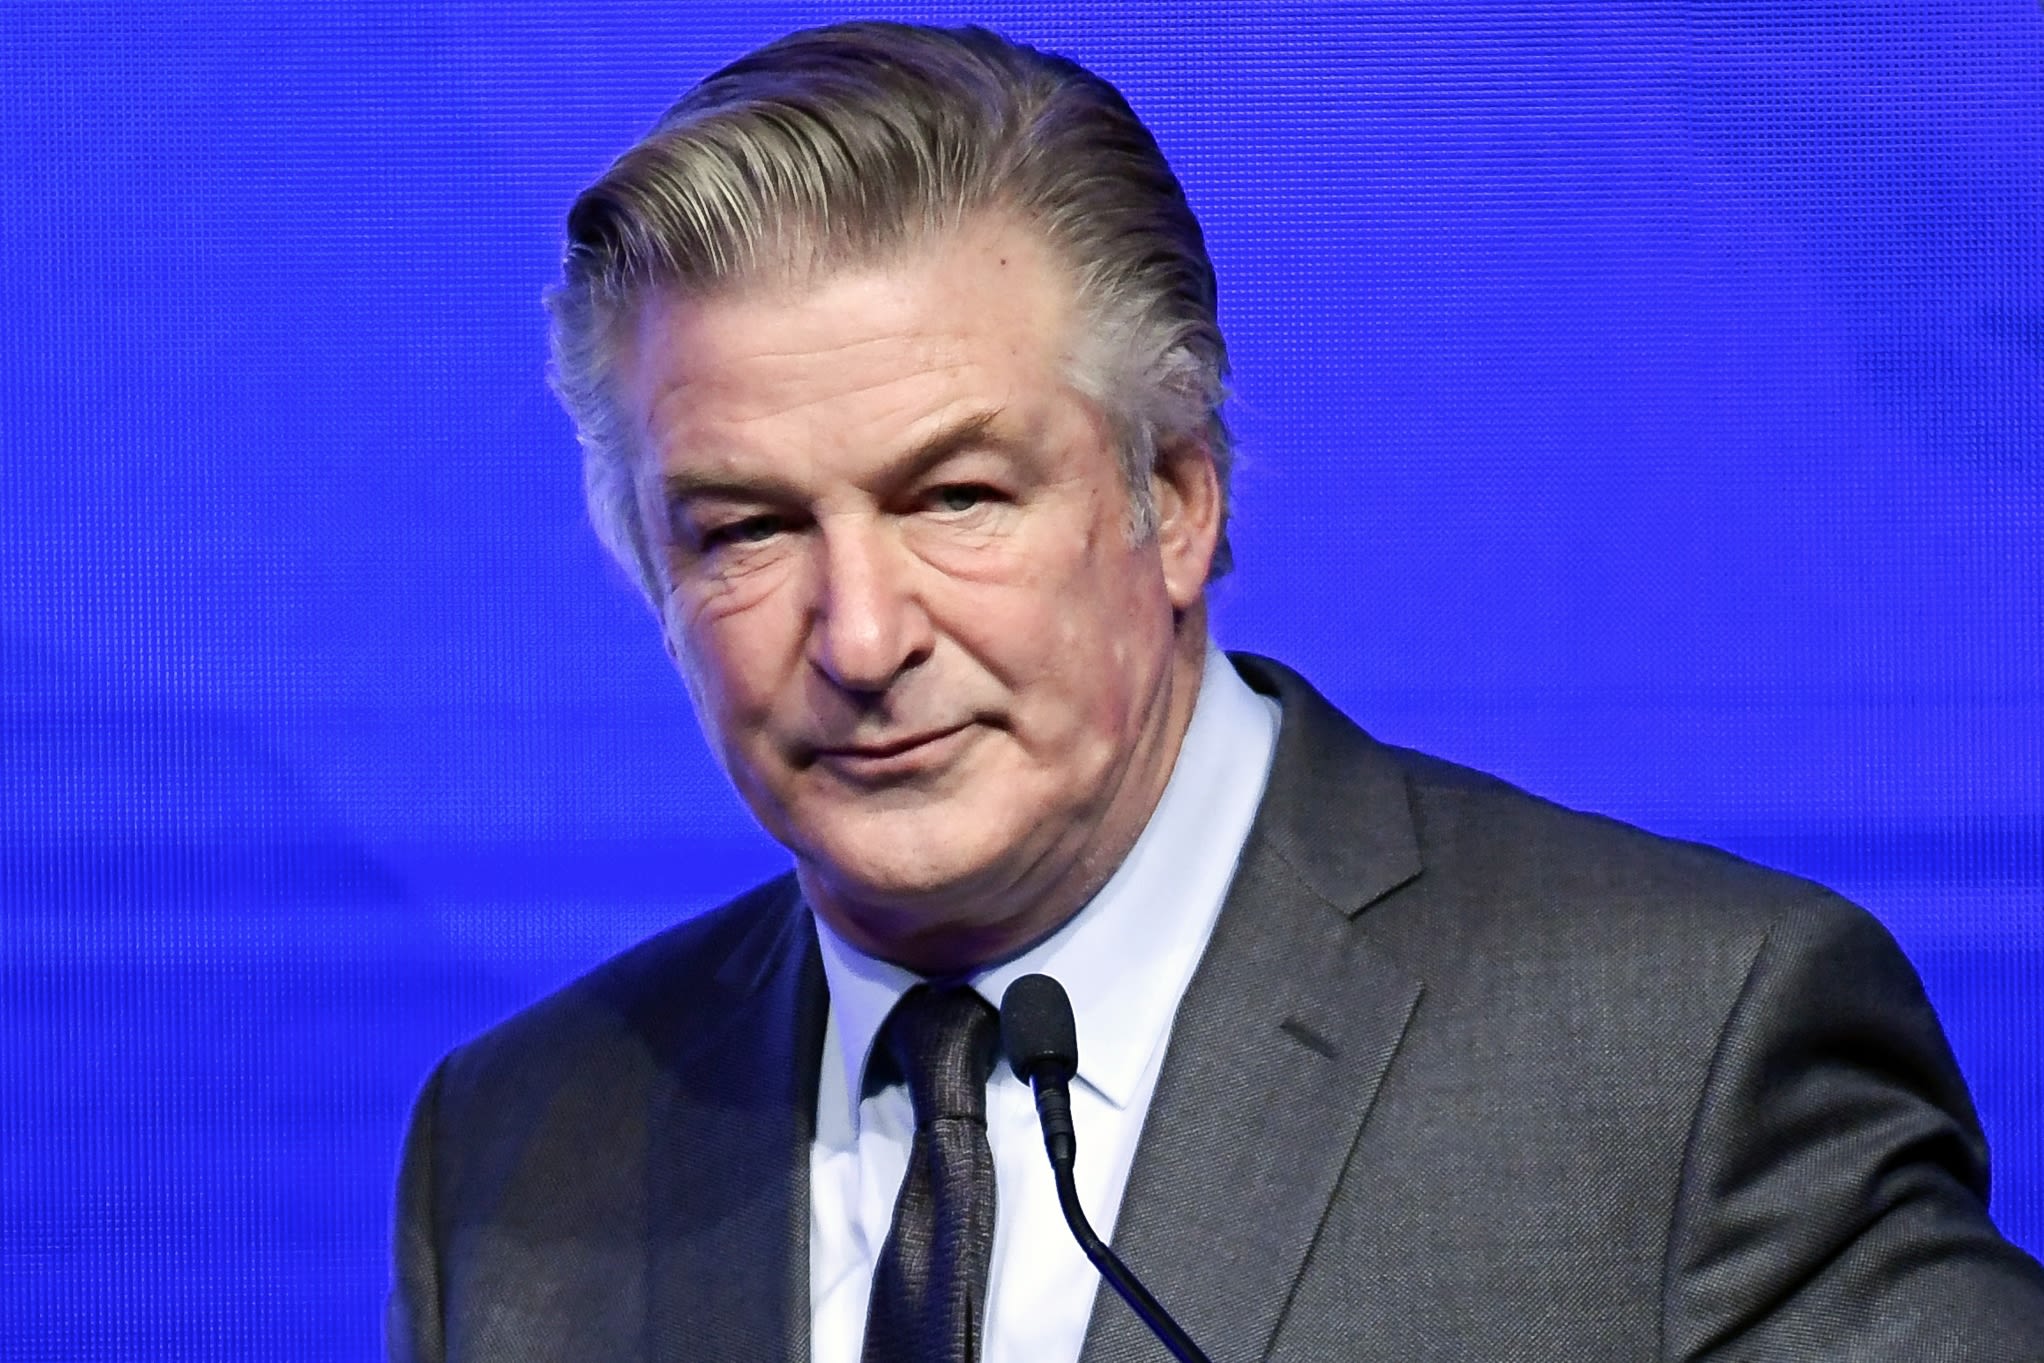 Involuntary manslaughter allegation against Alec Baldwin advances toward trial with new court ruling - WTOP News